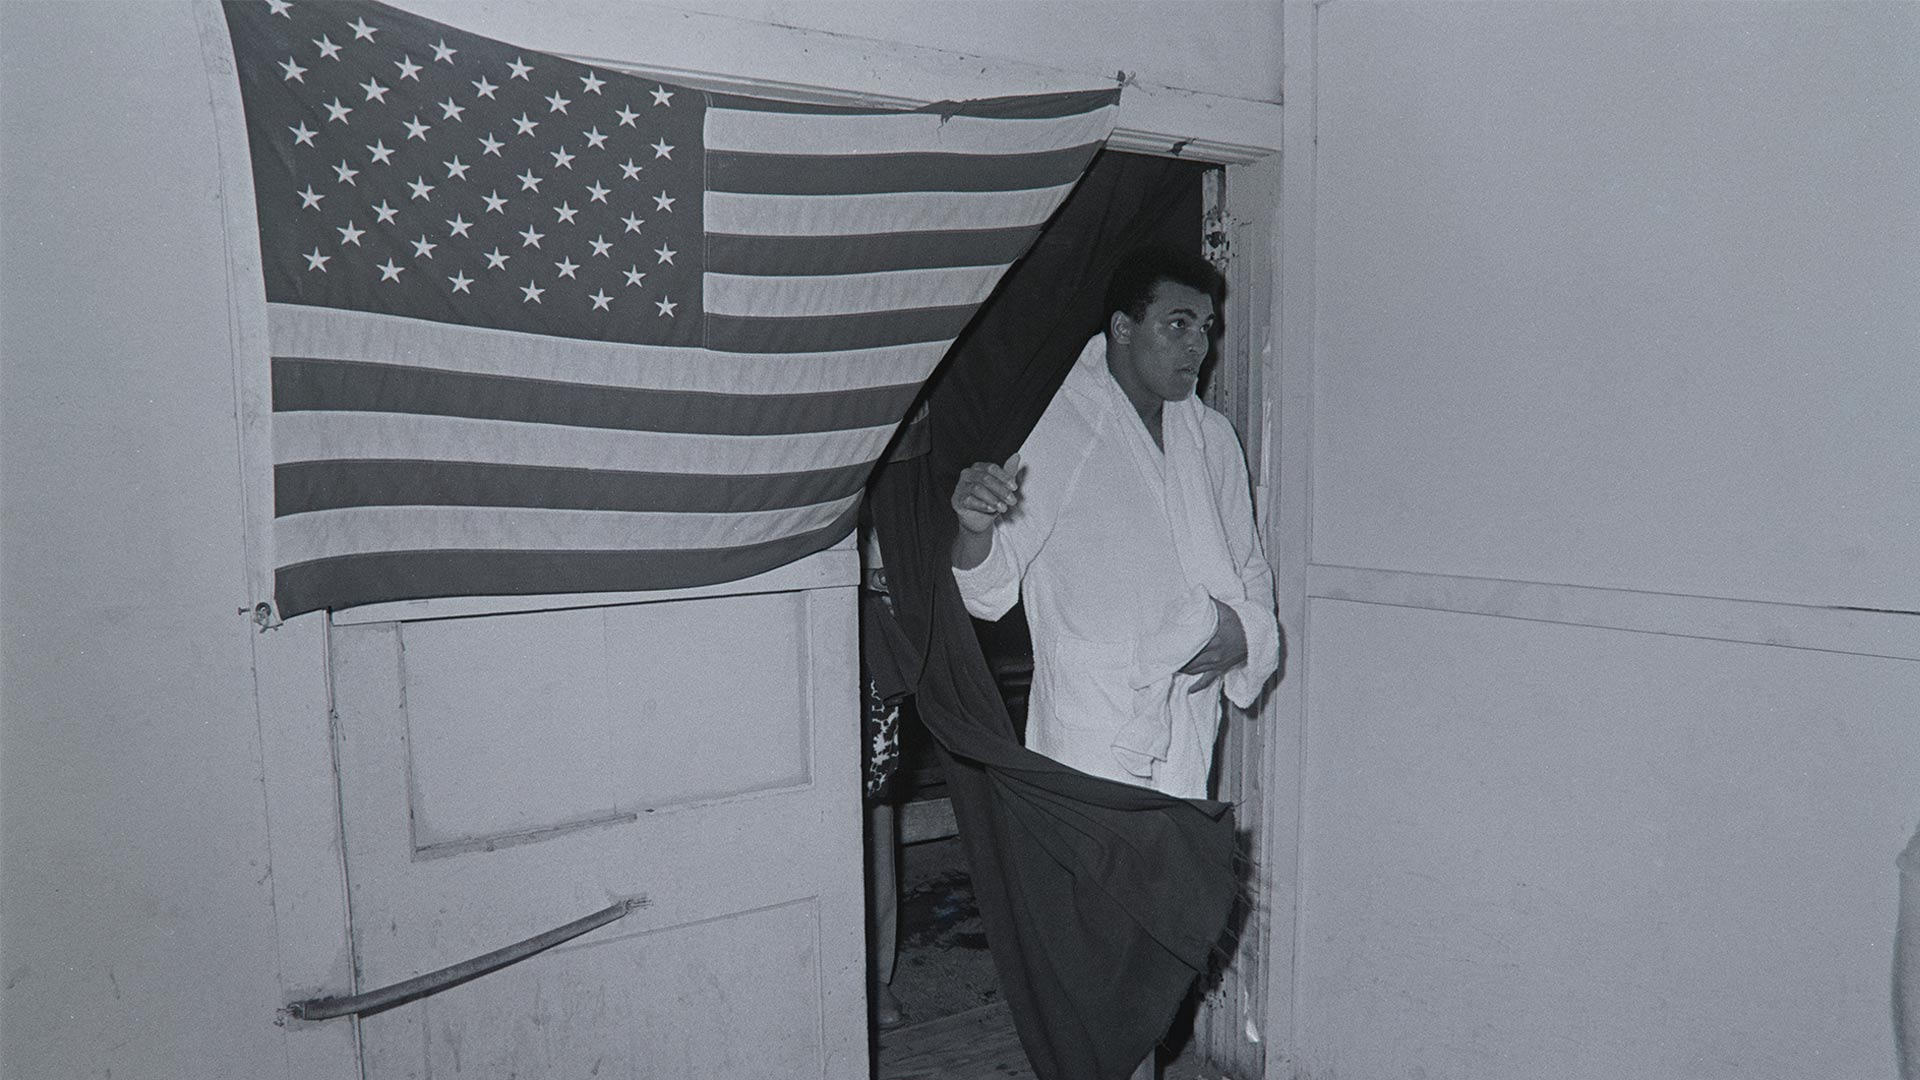 Muhammad Ali coming through doorway draped in a United States flag. Fifth Street Gym. Miami, FL. February 25, 1971.